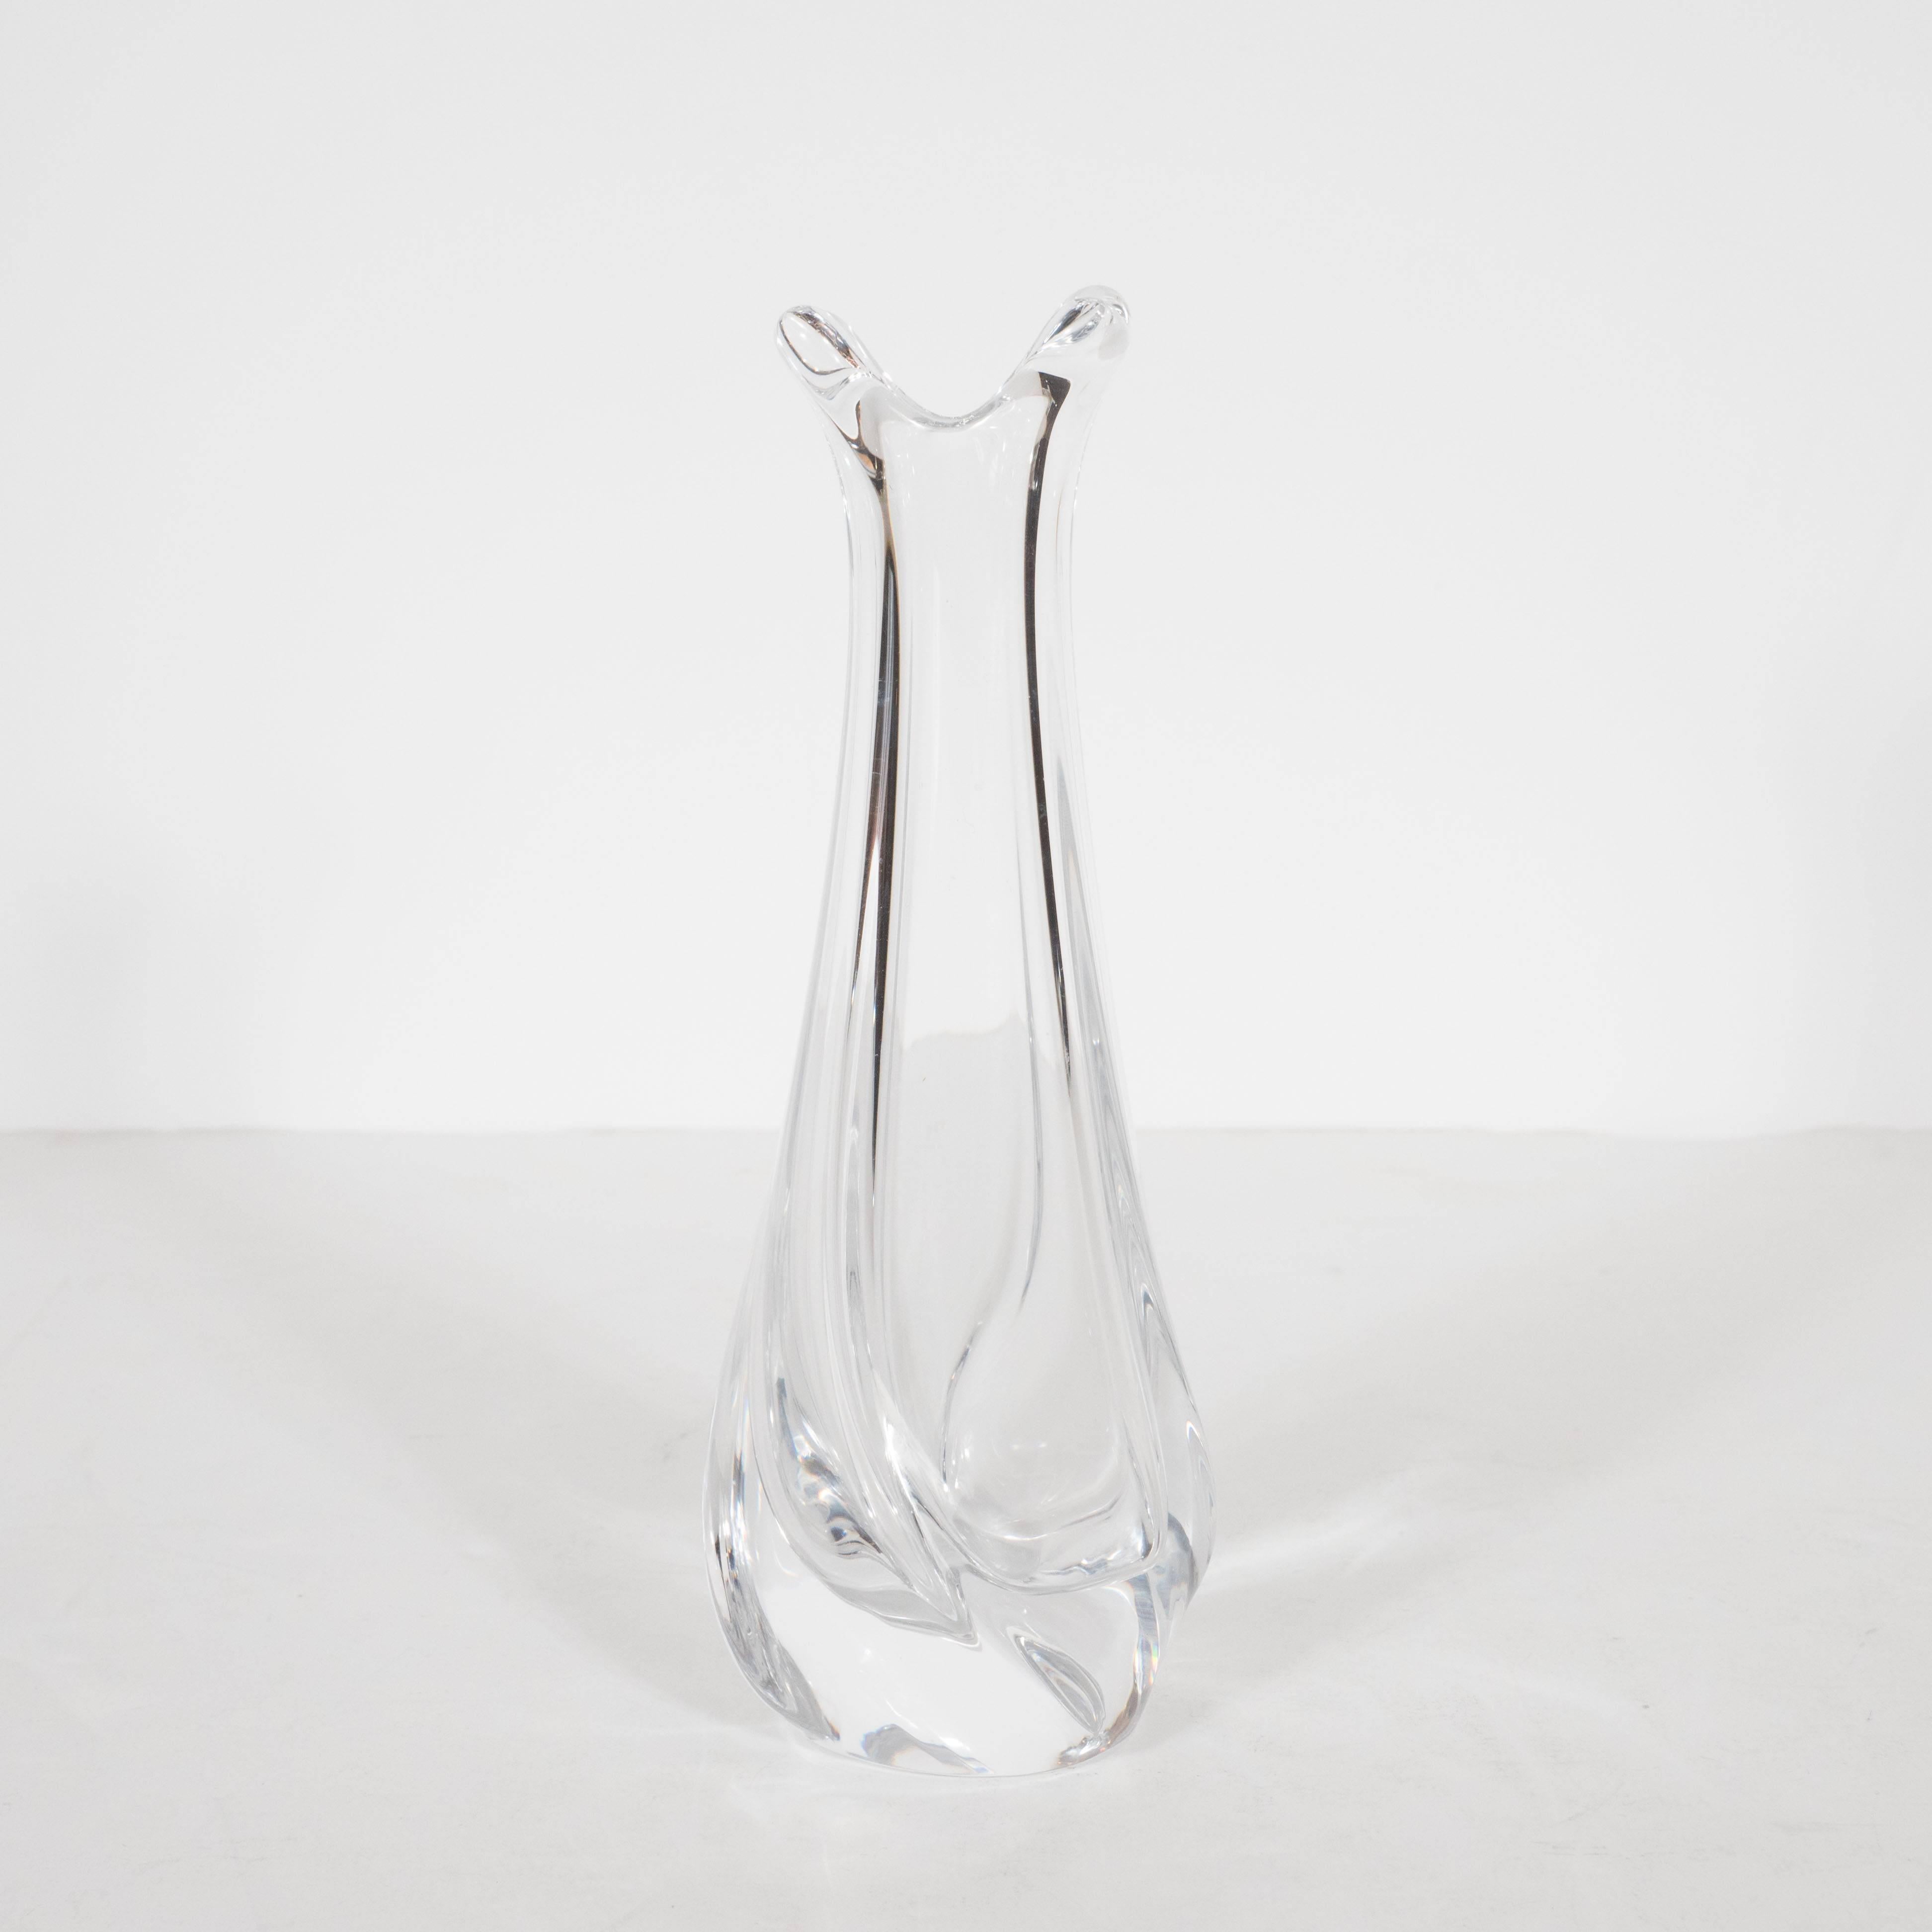 This stunning vase was handblown in France by Daum, one of the most esteemed French glass studios of the 20th century. It offers a sinuous curved rectangular form with two billowing lips at the top suggesting splashing water. The translucent form is